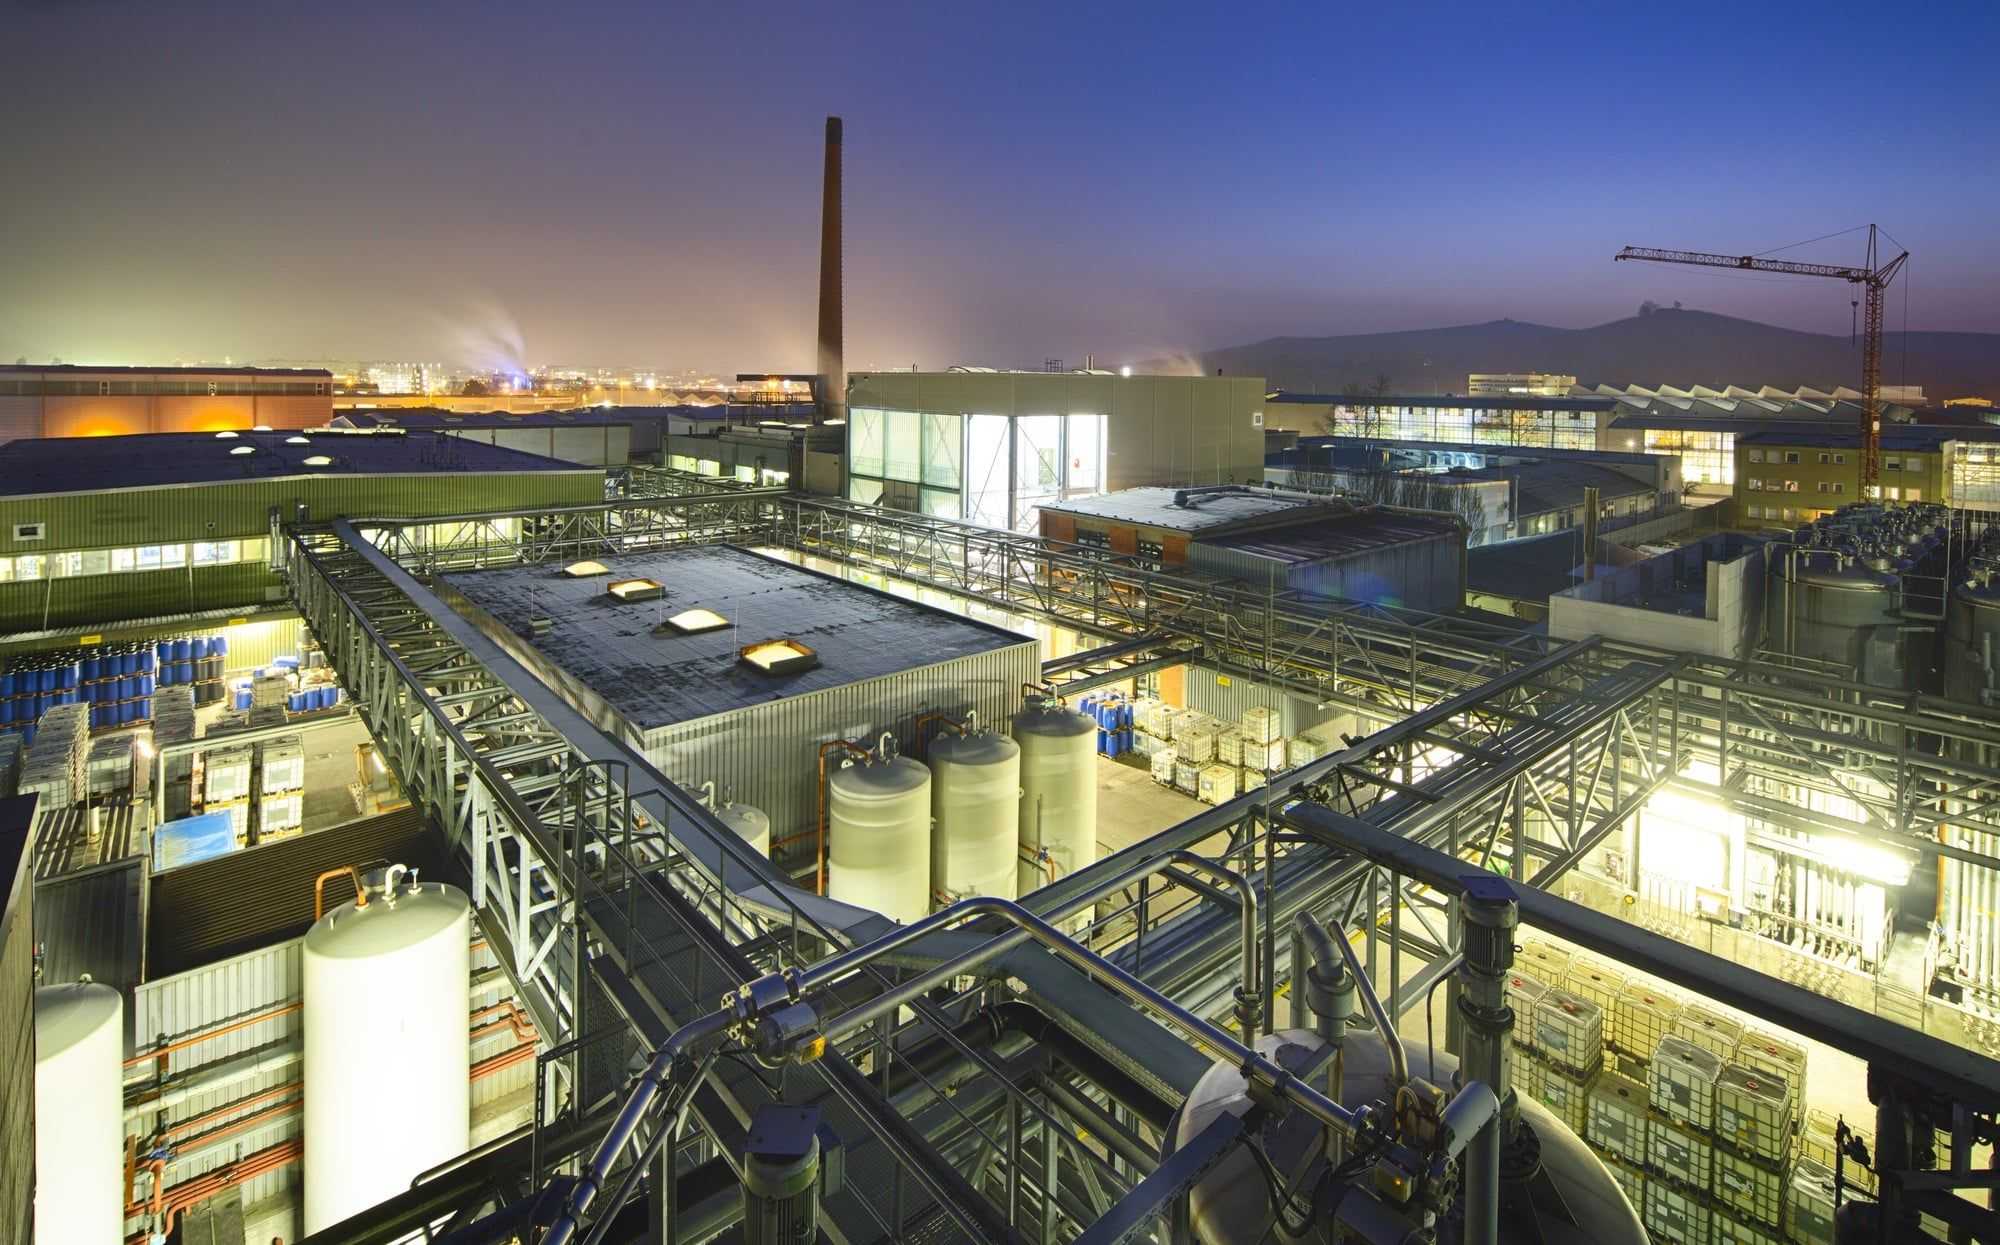 <p>MÜNZING CHEMIE GmbH was founded at this site in 1830. As the company expanded, the office buildings were spun off in 2014, but Heilbronn is still one of our most important production sites worldwide, with an annual output of approx. 25,000 tons.</p><p><br></p><p>In addition to production, the associated analytics, sample department, production planning, internal logistics as well as maintenance, and the project department are located here.</p><p><br></p><p>Around 600 different products from the series AGITAN®, AGITAN® DF, AGITAN® P, DEE FO®, EDAPLAN®, FENTAK®, FOAM BAN®, LUBA-print®, LUBARIT®, METOLAT®, METOLAT® P, OMBRELUB, TAFIGEL®, and UMBRELLIT are produced with annual quantities of 500 kg to 1000 tons.</p><p><br></p><p>These are defoamers, dispersants, wetting agents and leveling additives, thickeners, wax emulsions, powder defoamers and additives for wood processing. At the site, mixtures, esterifications, neutralizations, sulfations, polymerizations, hydrosilylations, bisulfite additions and various methods for homogenizing emulsions and dispersions under pressure or under atmospheric conditions are carried out in 6 production areas that are largely designed for the handling of flammable substances. A large number of reactors in the range of 70l - 27,000 l with associated tank farms, a cooling and heating system from -10 °C to 240 °C and a team of 85 employees are available, who work continuously to meet the requirements of our customers.</p><p><br></p><p><a href="/documents/Information_fuer_die_Oeffentlichkeit_nach_%C2%A7_8a_der_Stoerfallverordnung_2021-08-31.pdf" rel="noopener noreferrer" target="_blank" style="background-color: rgb(247, 247, 247);">Information</a><a href="/documents/Information_fuer_die_Oeffentlichkeit_nach_%C2%A7_8a_der_Stoerfallverordnung_2021-08-31.pdf" rel="noopener noreferrer" target="_blank"> </a><a href="/documents/Information_fuer_die_Oeffentlichkeit_nach_%C2%A7_8a_der_Stoerfallverordnung_2021-08-31.pdf" rel="noopener noreferrer" target="_blank" style="background-color: rgb(247, 247, 247);">to the public in accordance with § 8a Störfallverordnung</a></p>